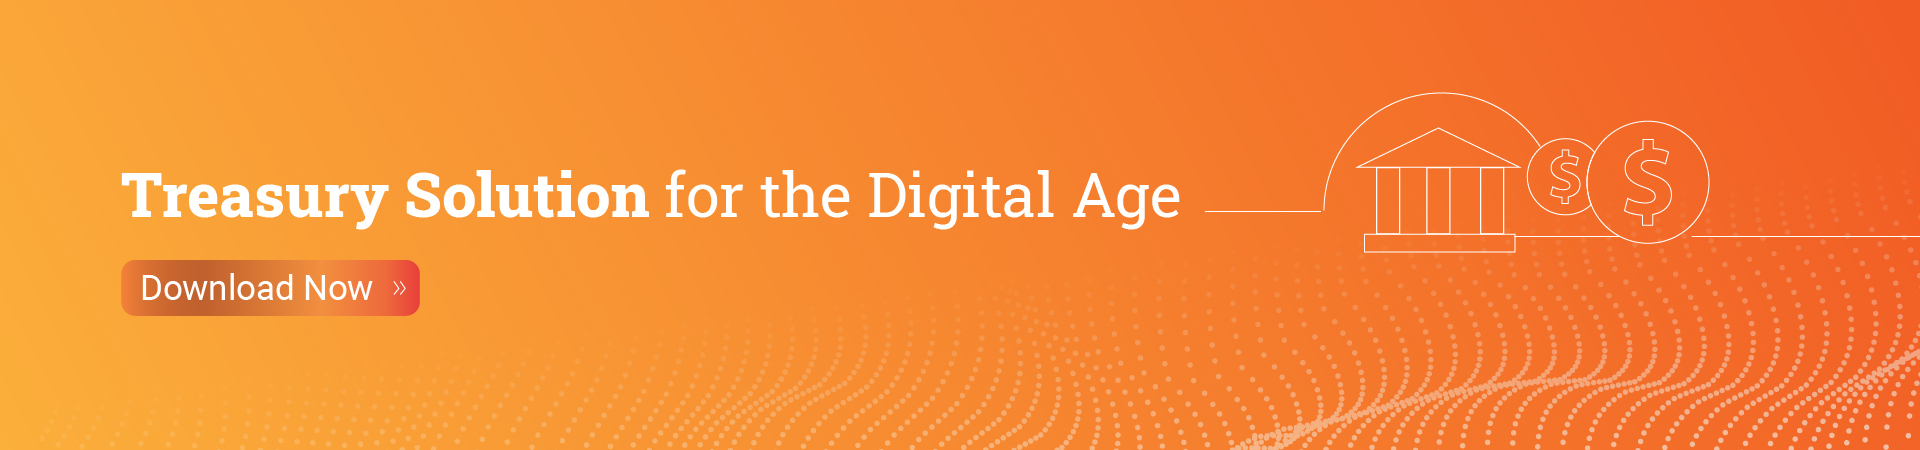 Treasury Solutions for the Digital Age Banner